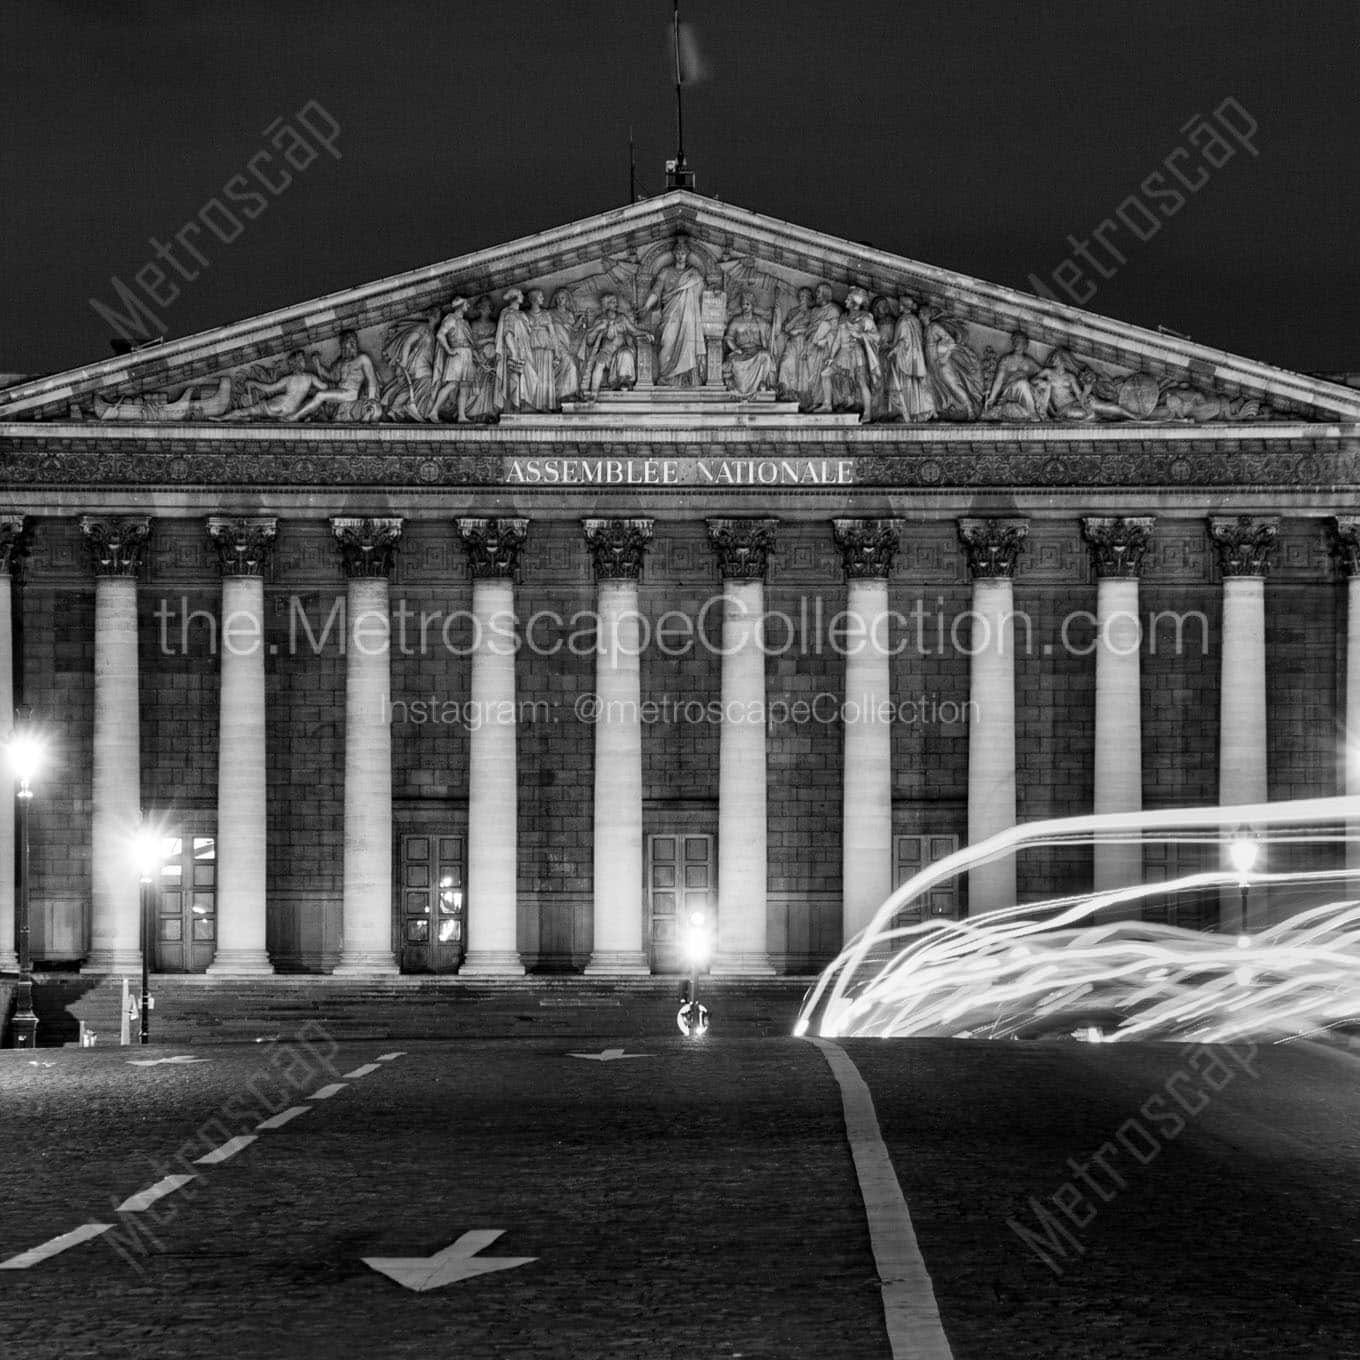 assemblee nationale building at night Black & White Office Art